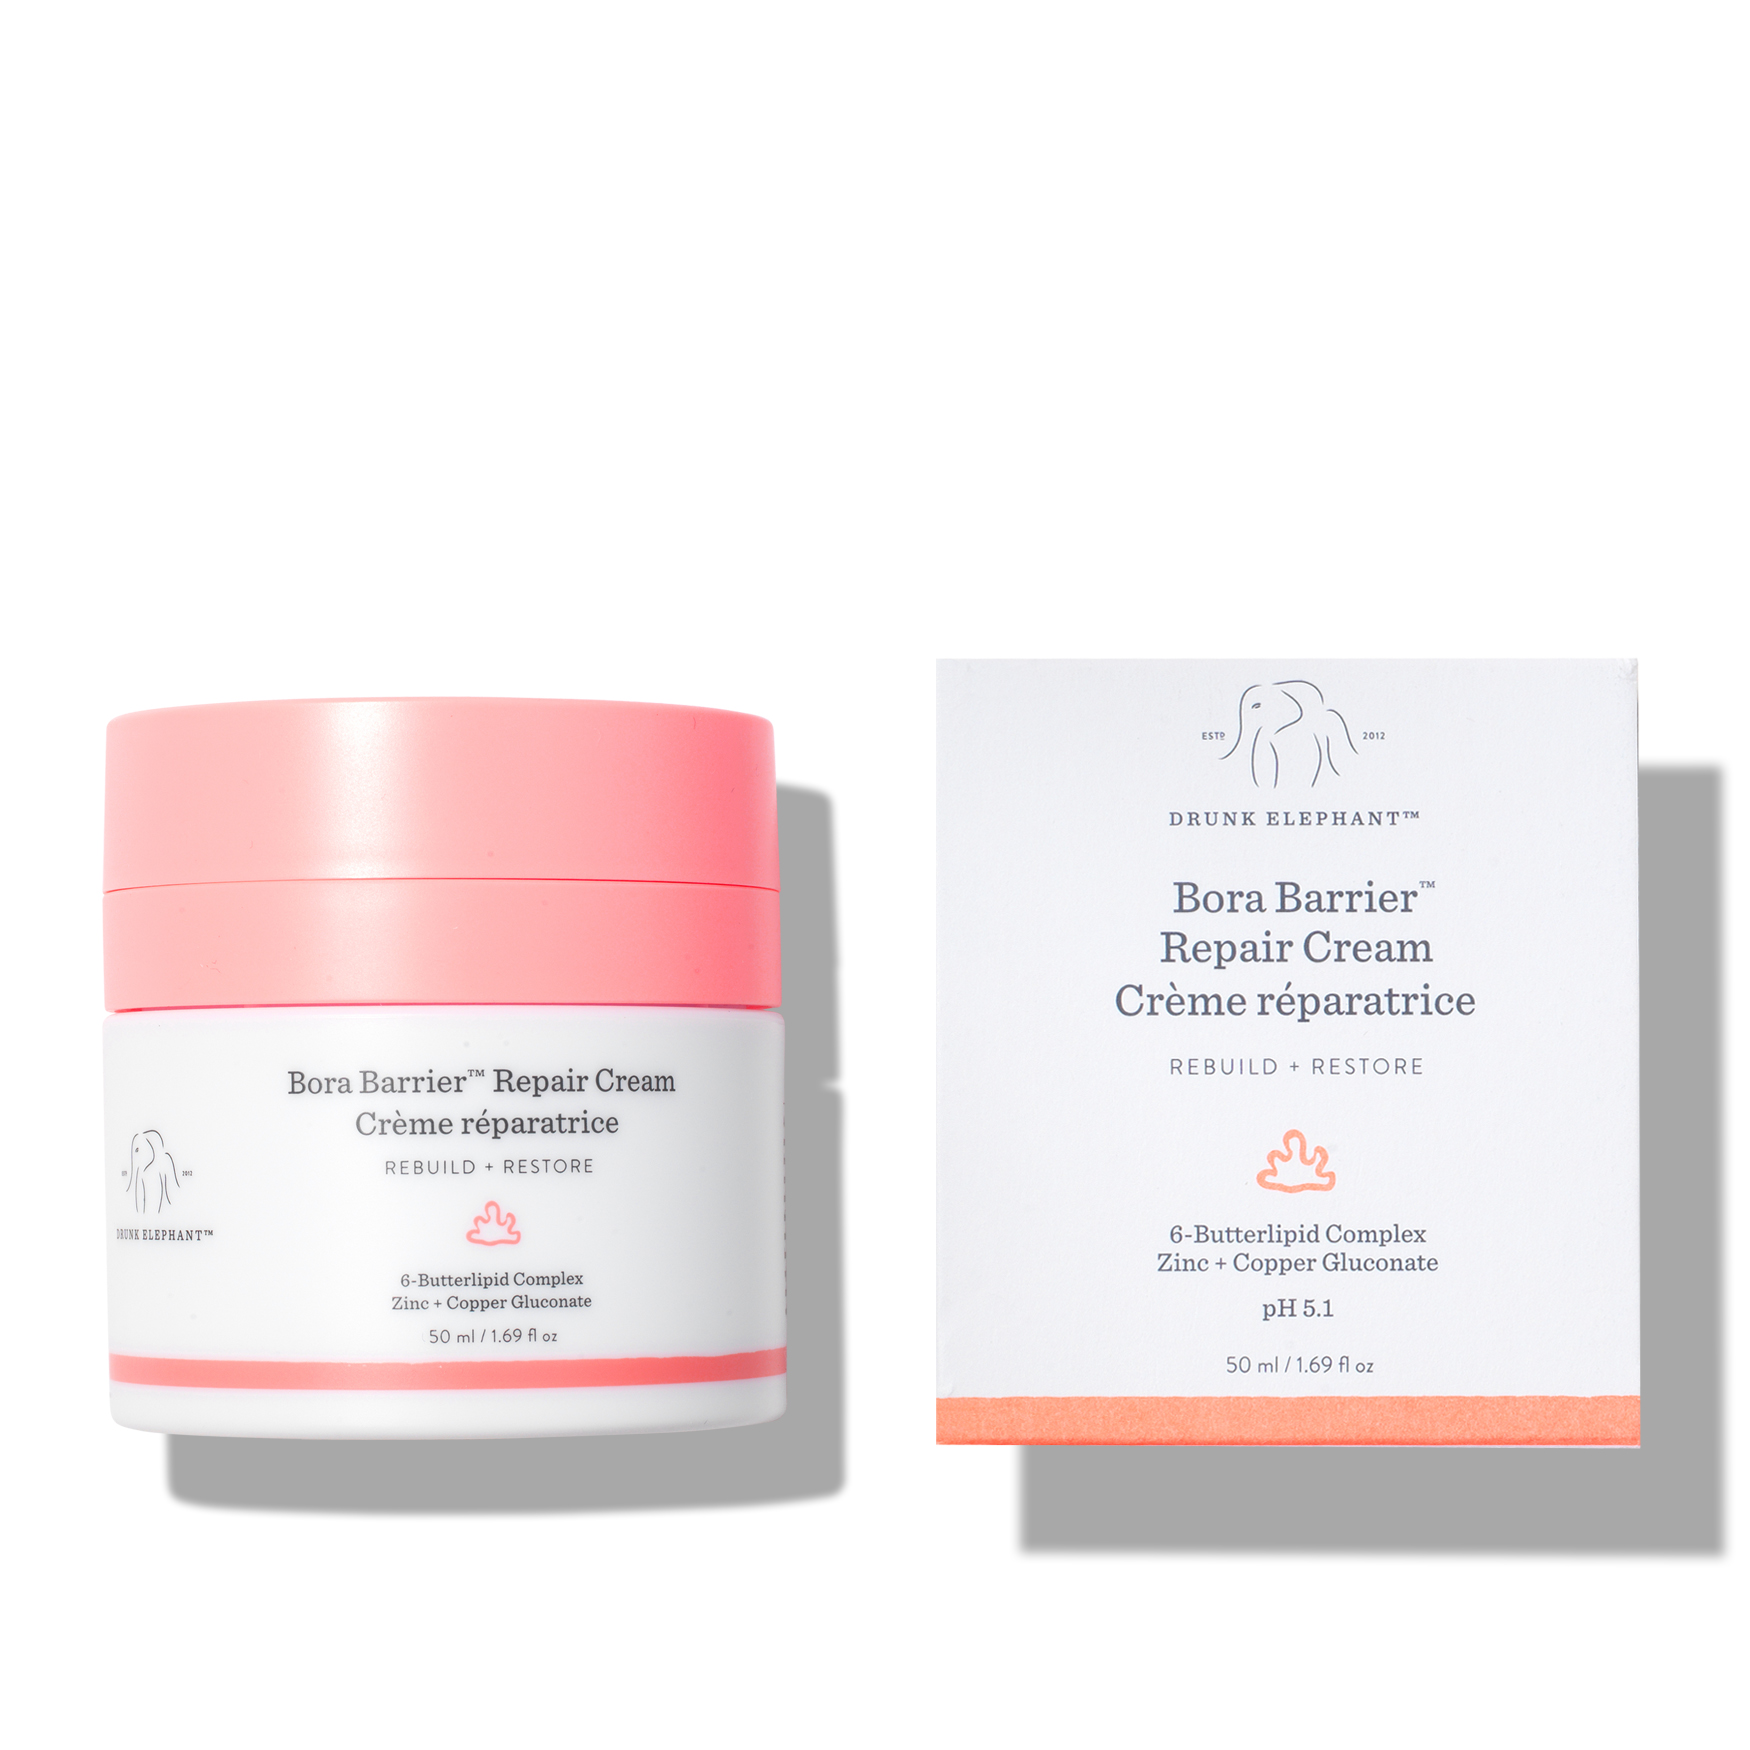 Drunk Elephant New Bora Barrier Cream Review: Our Results